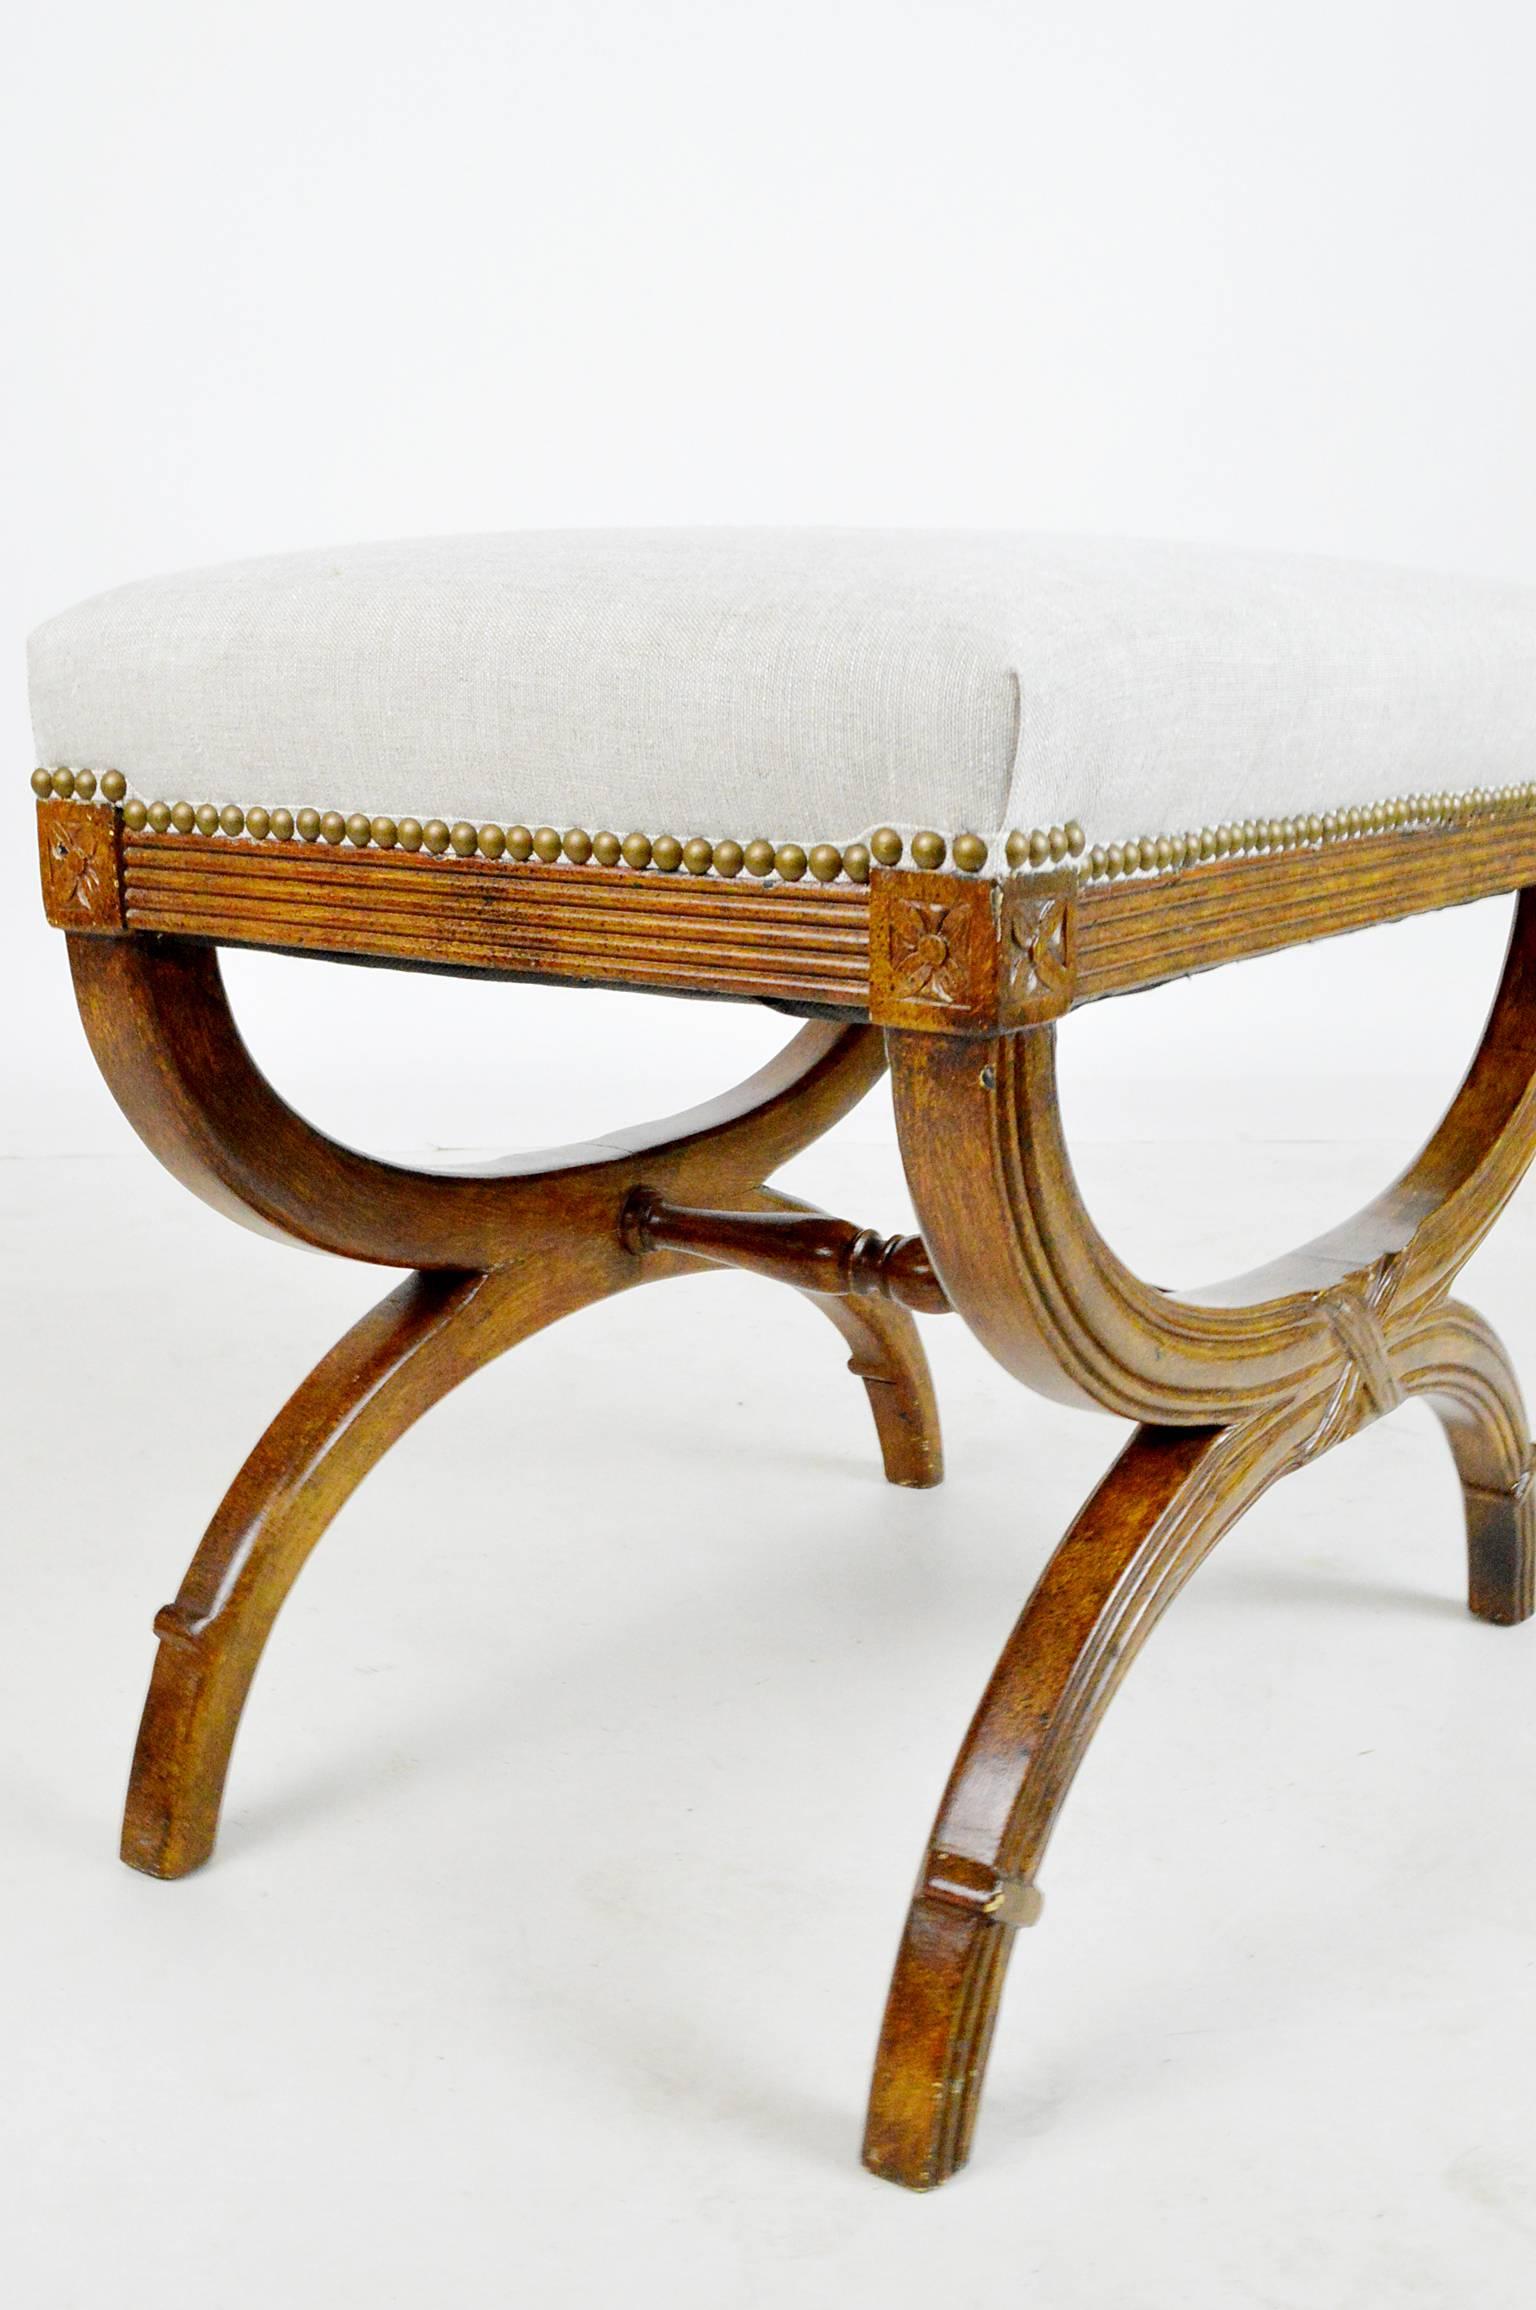 Regency style stool with carved trim, turned stretcher and linen upholstery, mid-20th century.